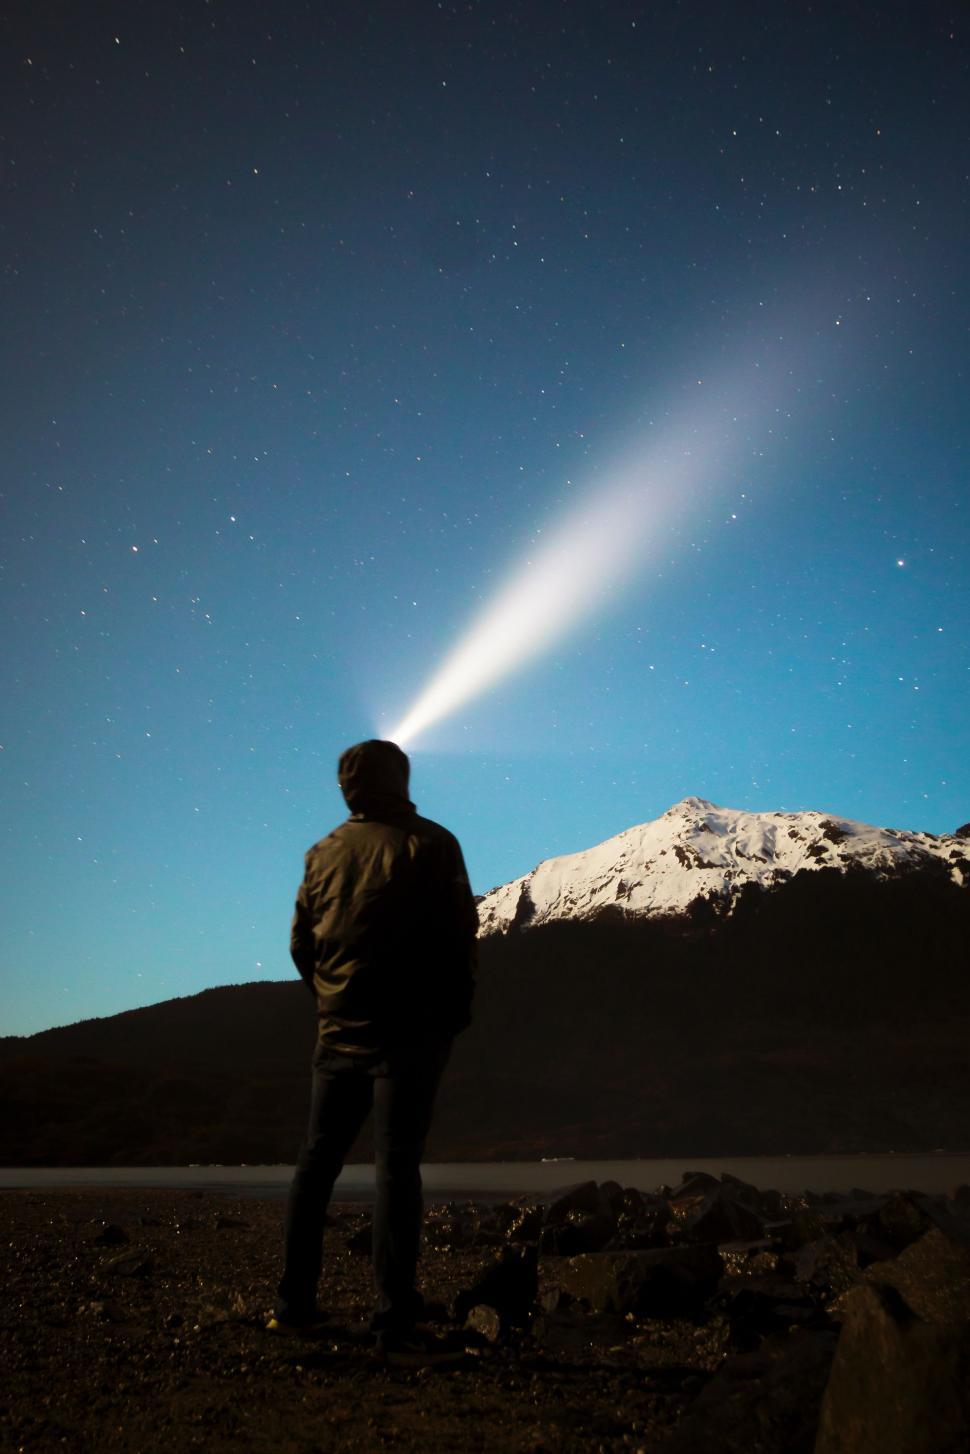 Free Image of Man Looking Up at a Comet in the Sky 